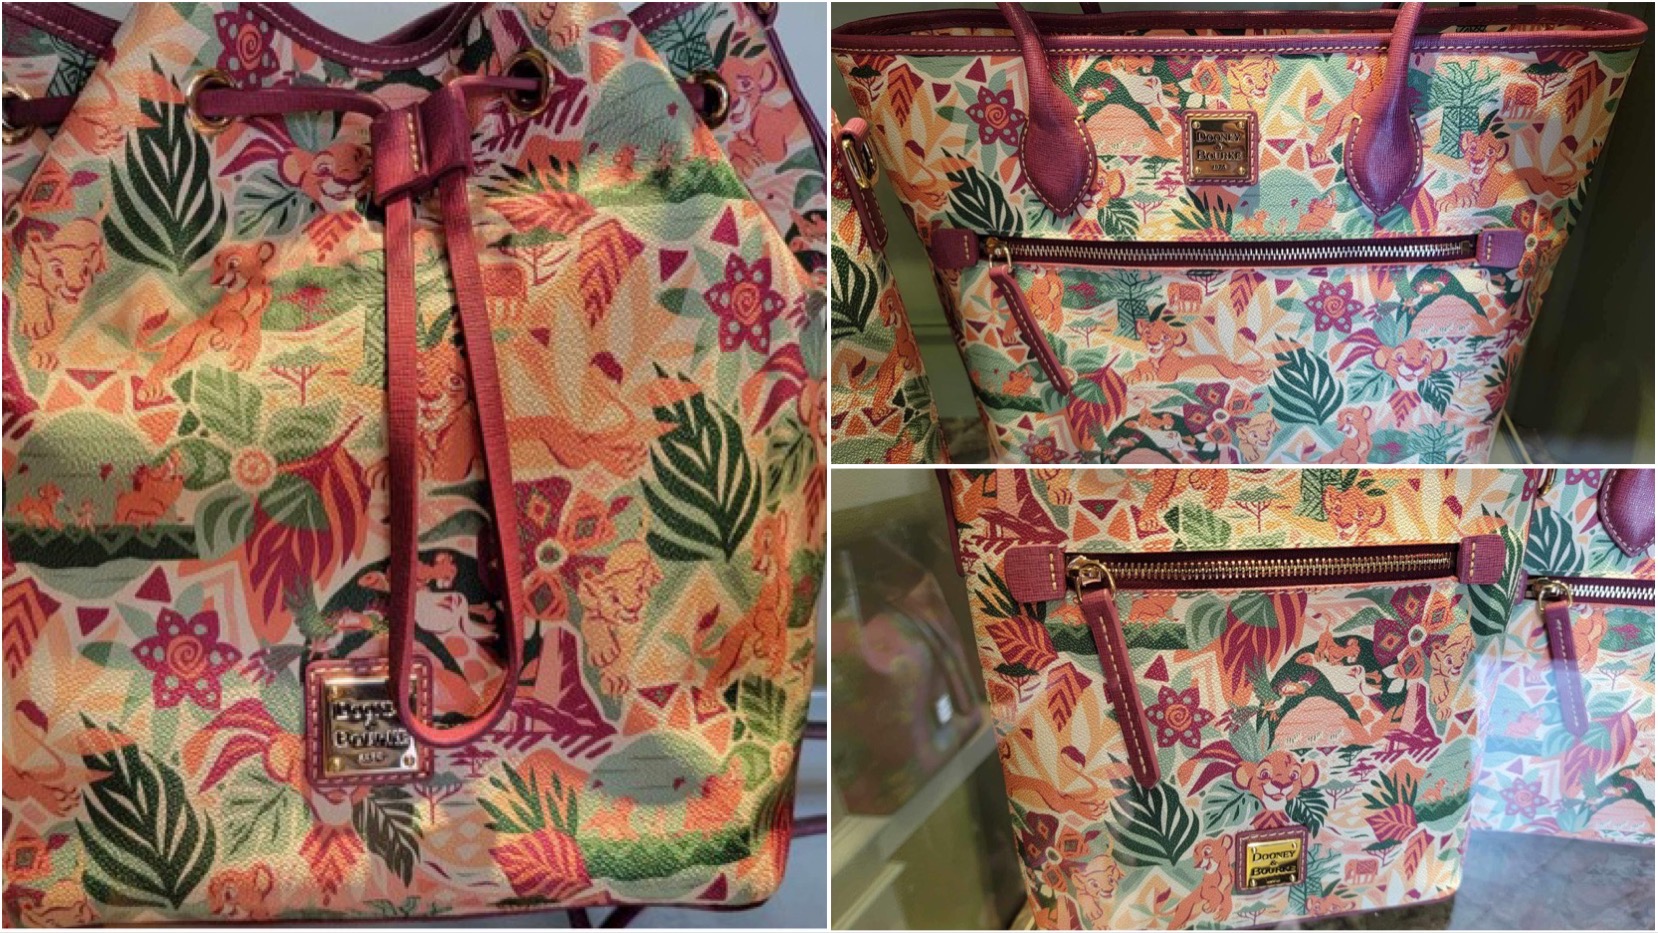 We Can Already Feel The Love For This The Lion King Dooney & Bourke Collection!